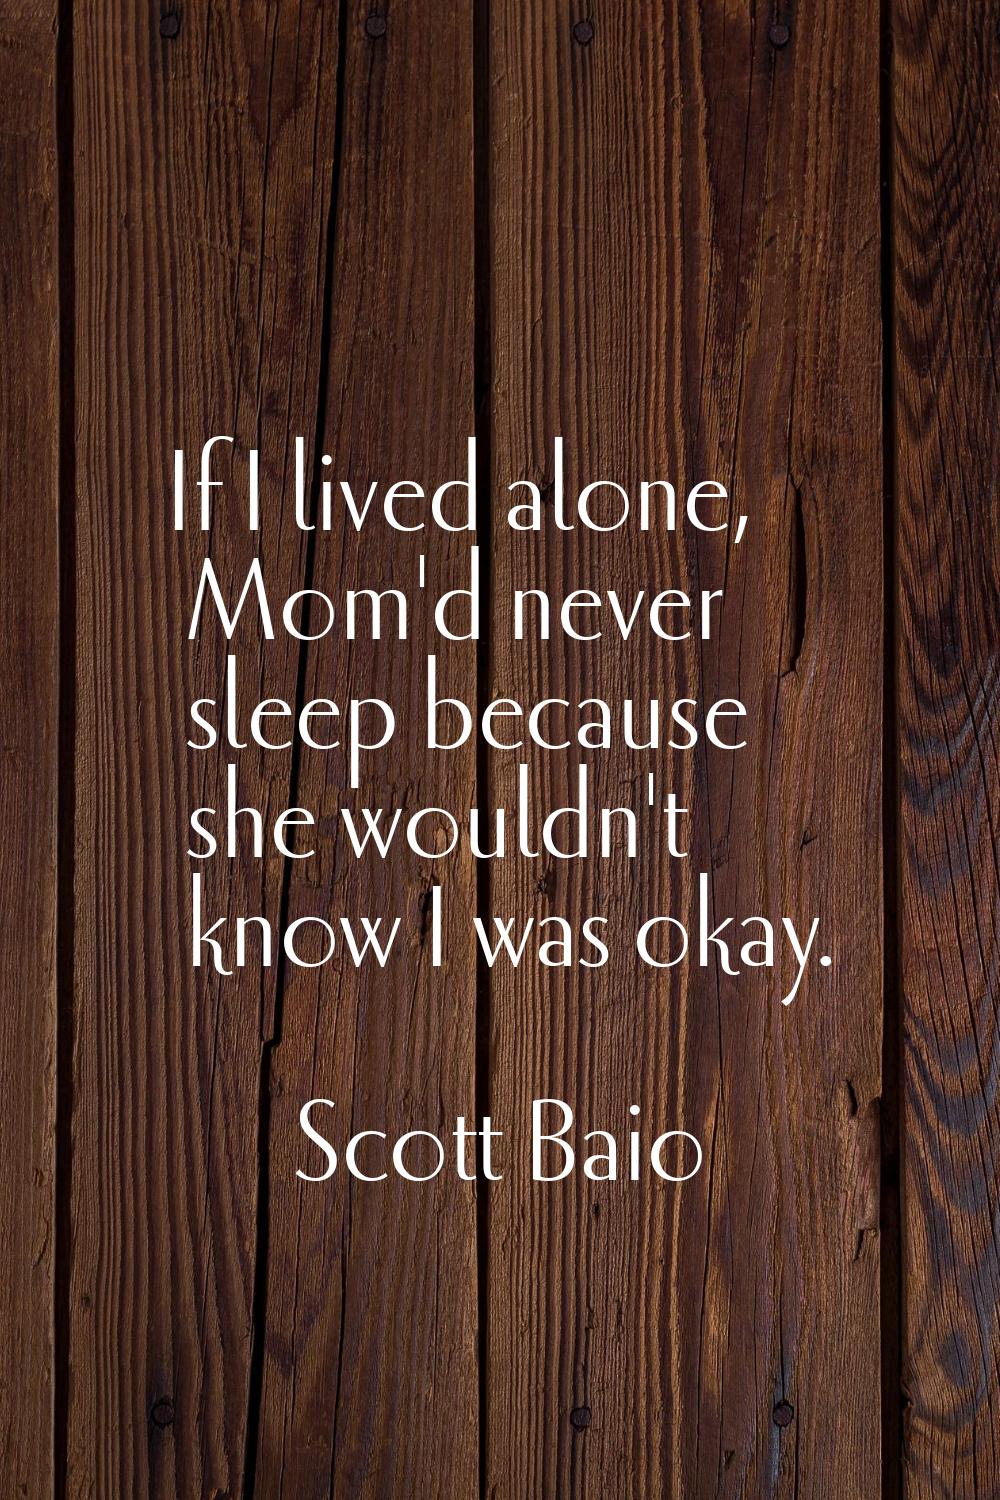 If I lived alone, Mom'd never sleep because she wouldn't know I was okay.